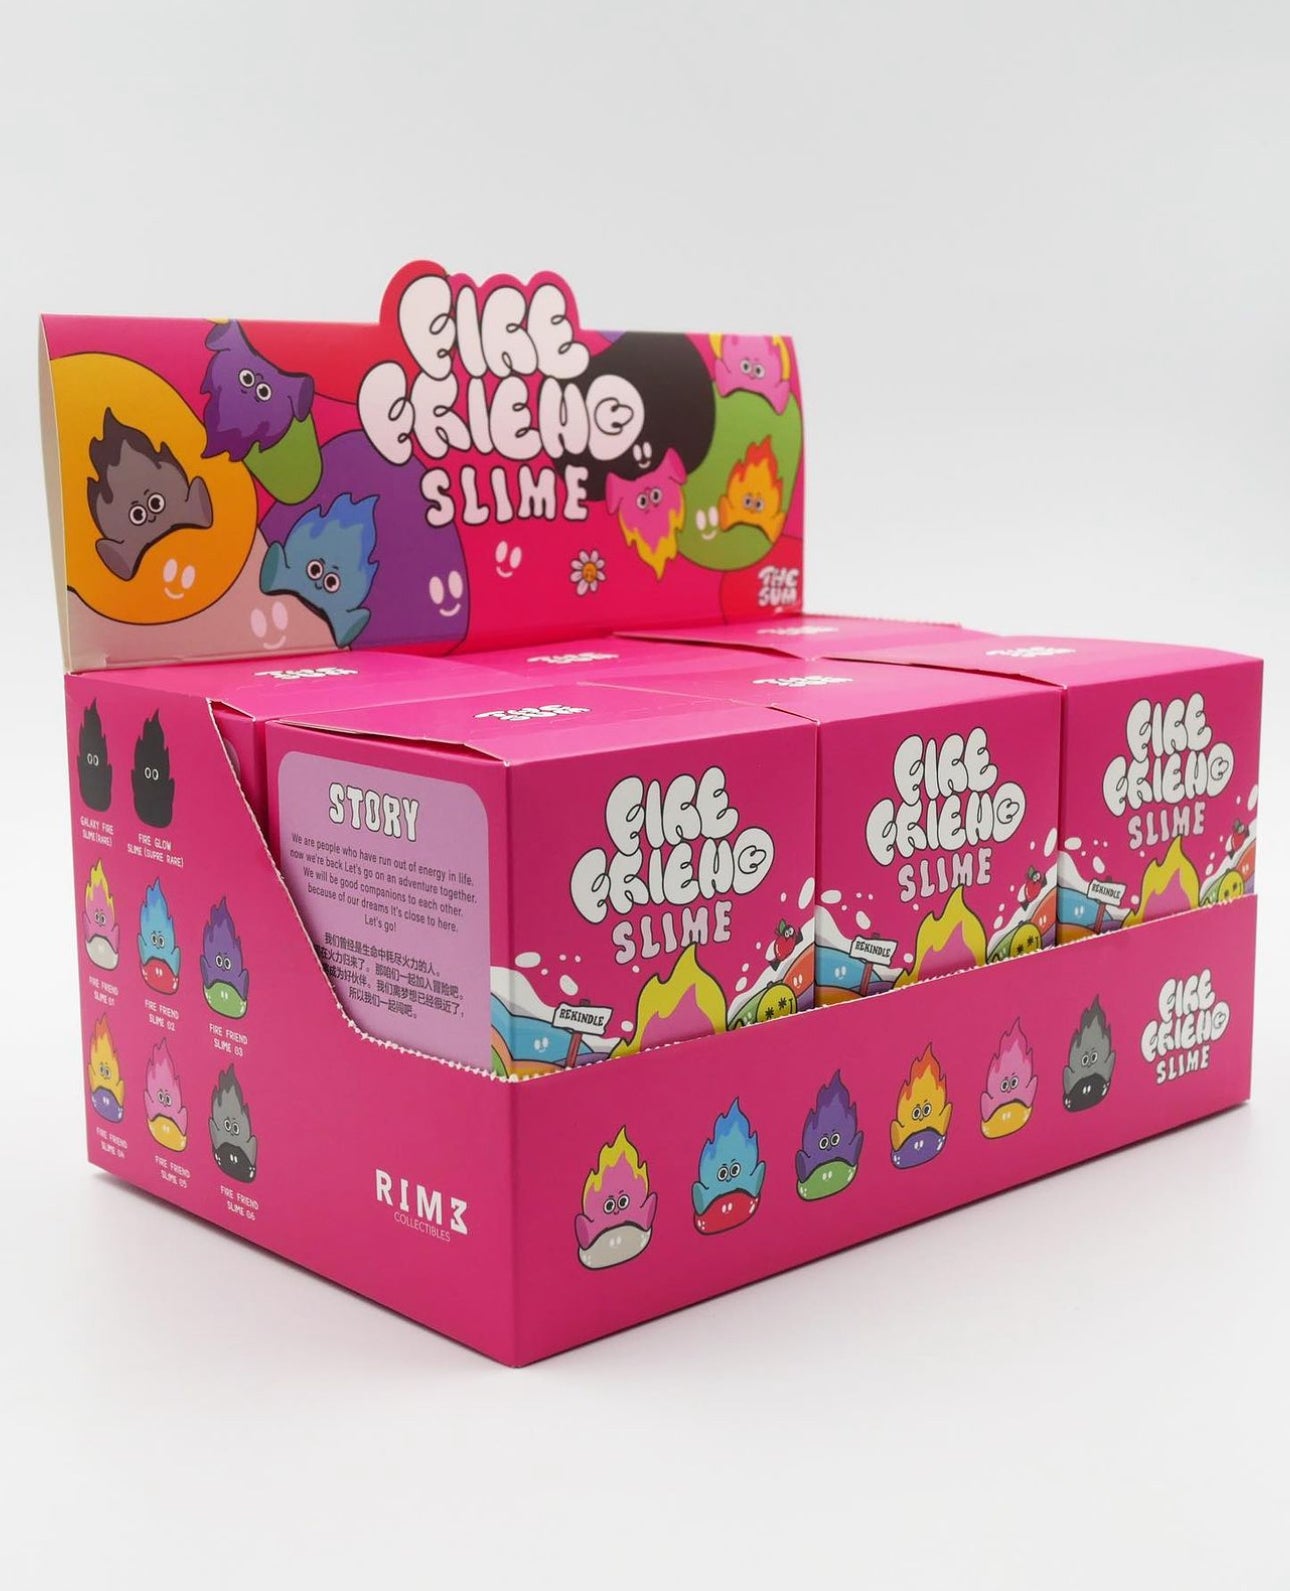 A pink blind box featuring cartoon characters, including a flamingo and a blue monster, part of the Fire Friend Blind Box Series by The Jum Thailand at Strangecat Toys.